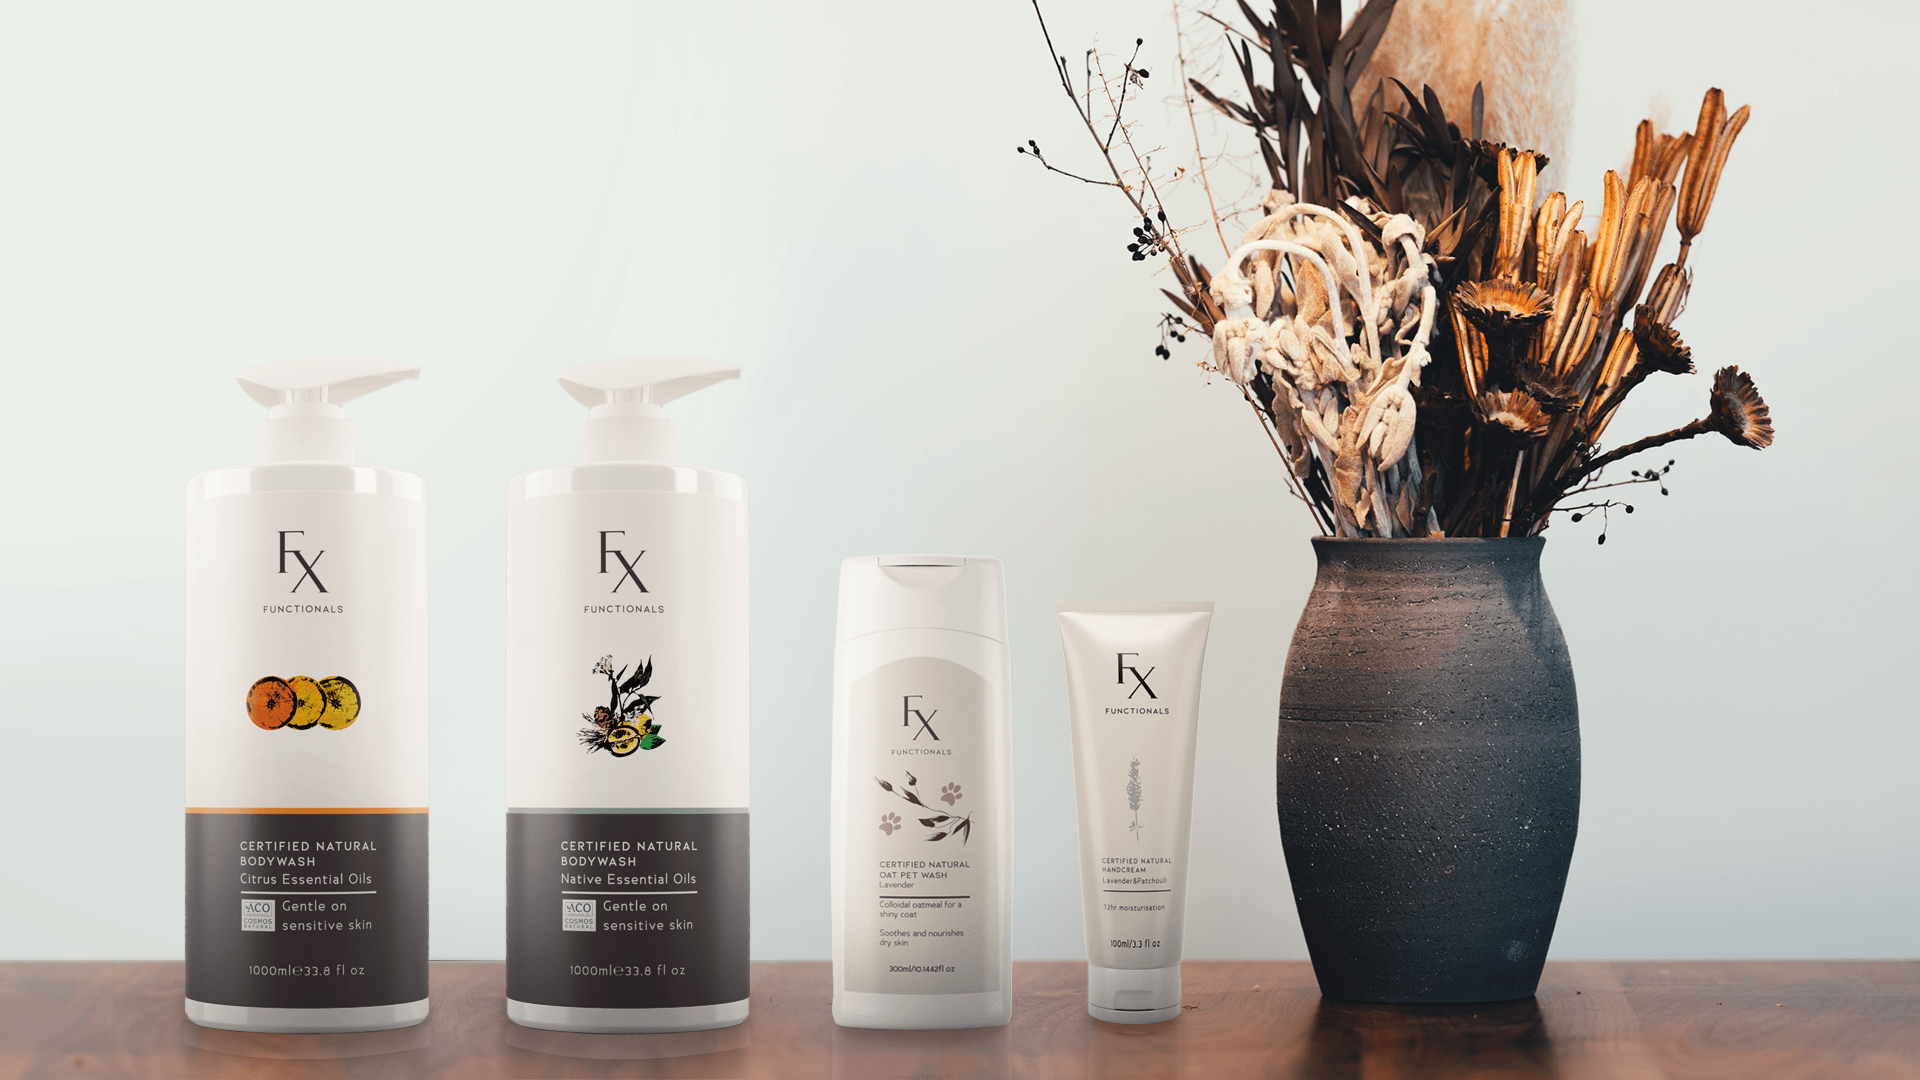 Functionals certified natural product range including: bodywash, dog shampoo and handcream on wooden table with dark ceramic vase filled with dried flowers